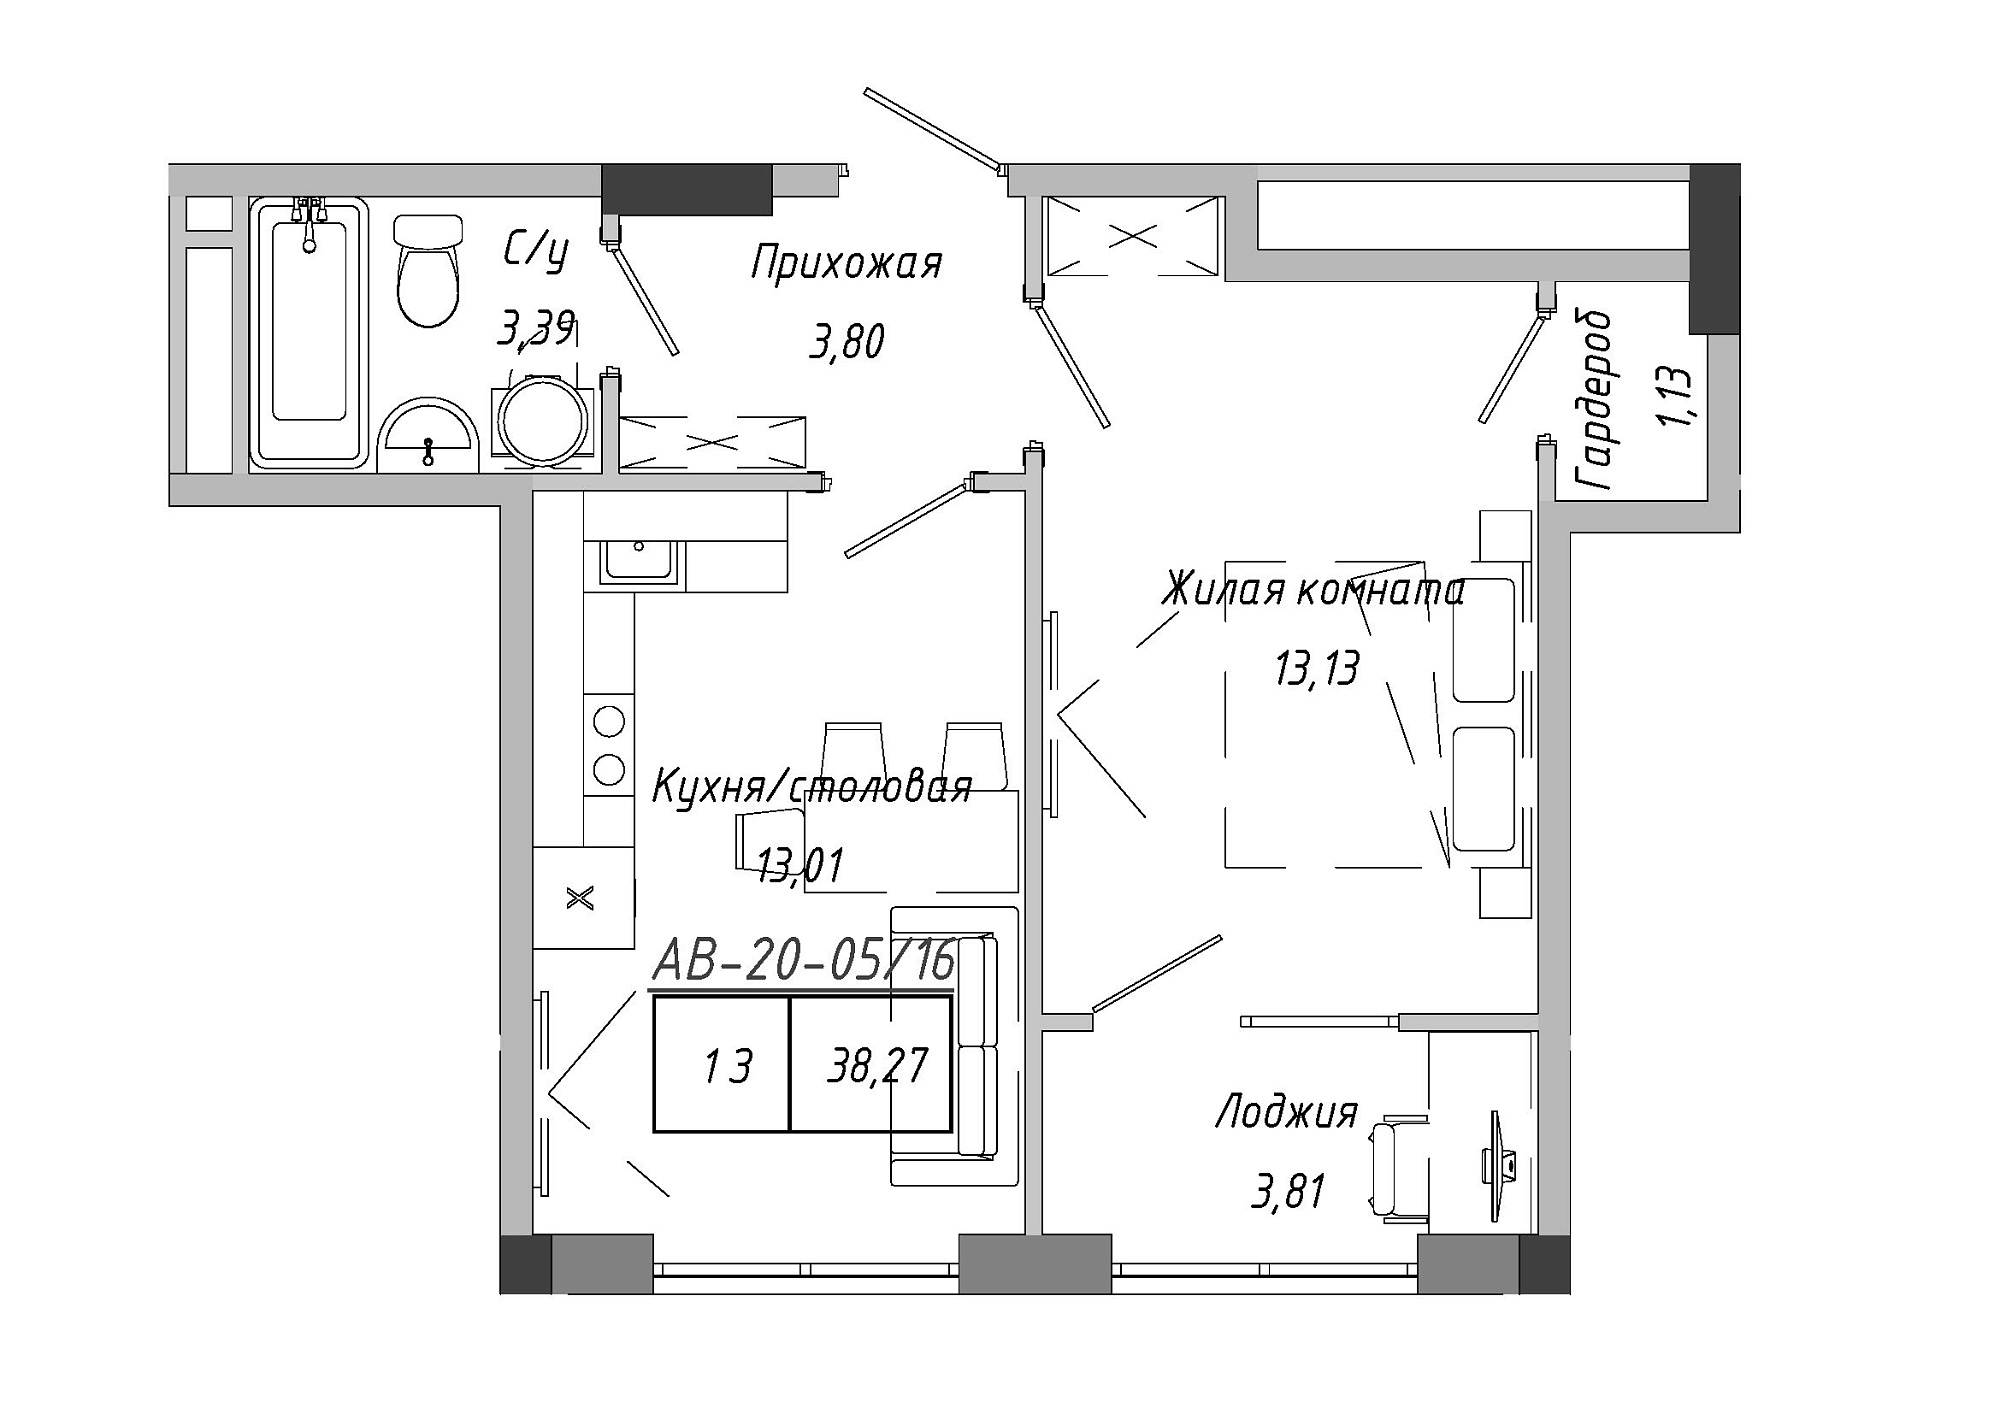 Planning 1-rm flats area 38.79m2, AB-20-05/00016.